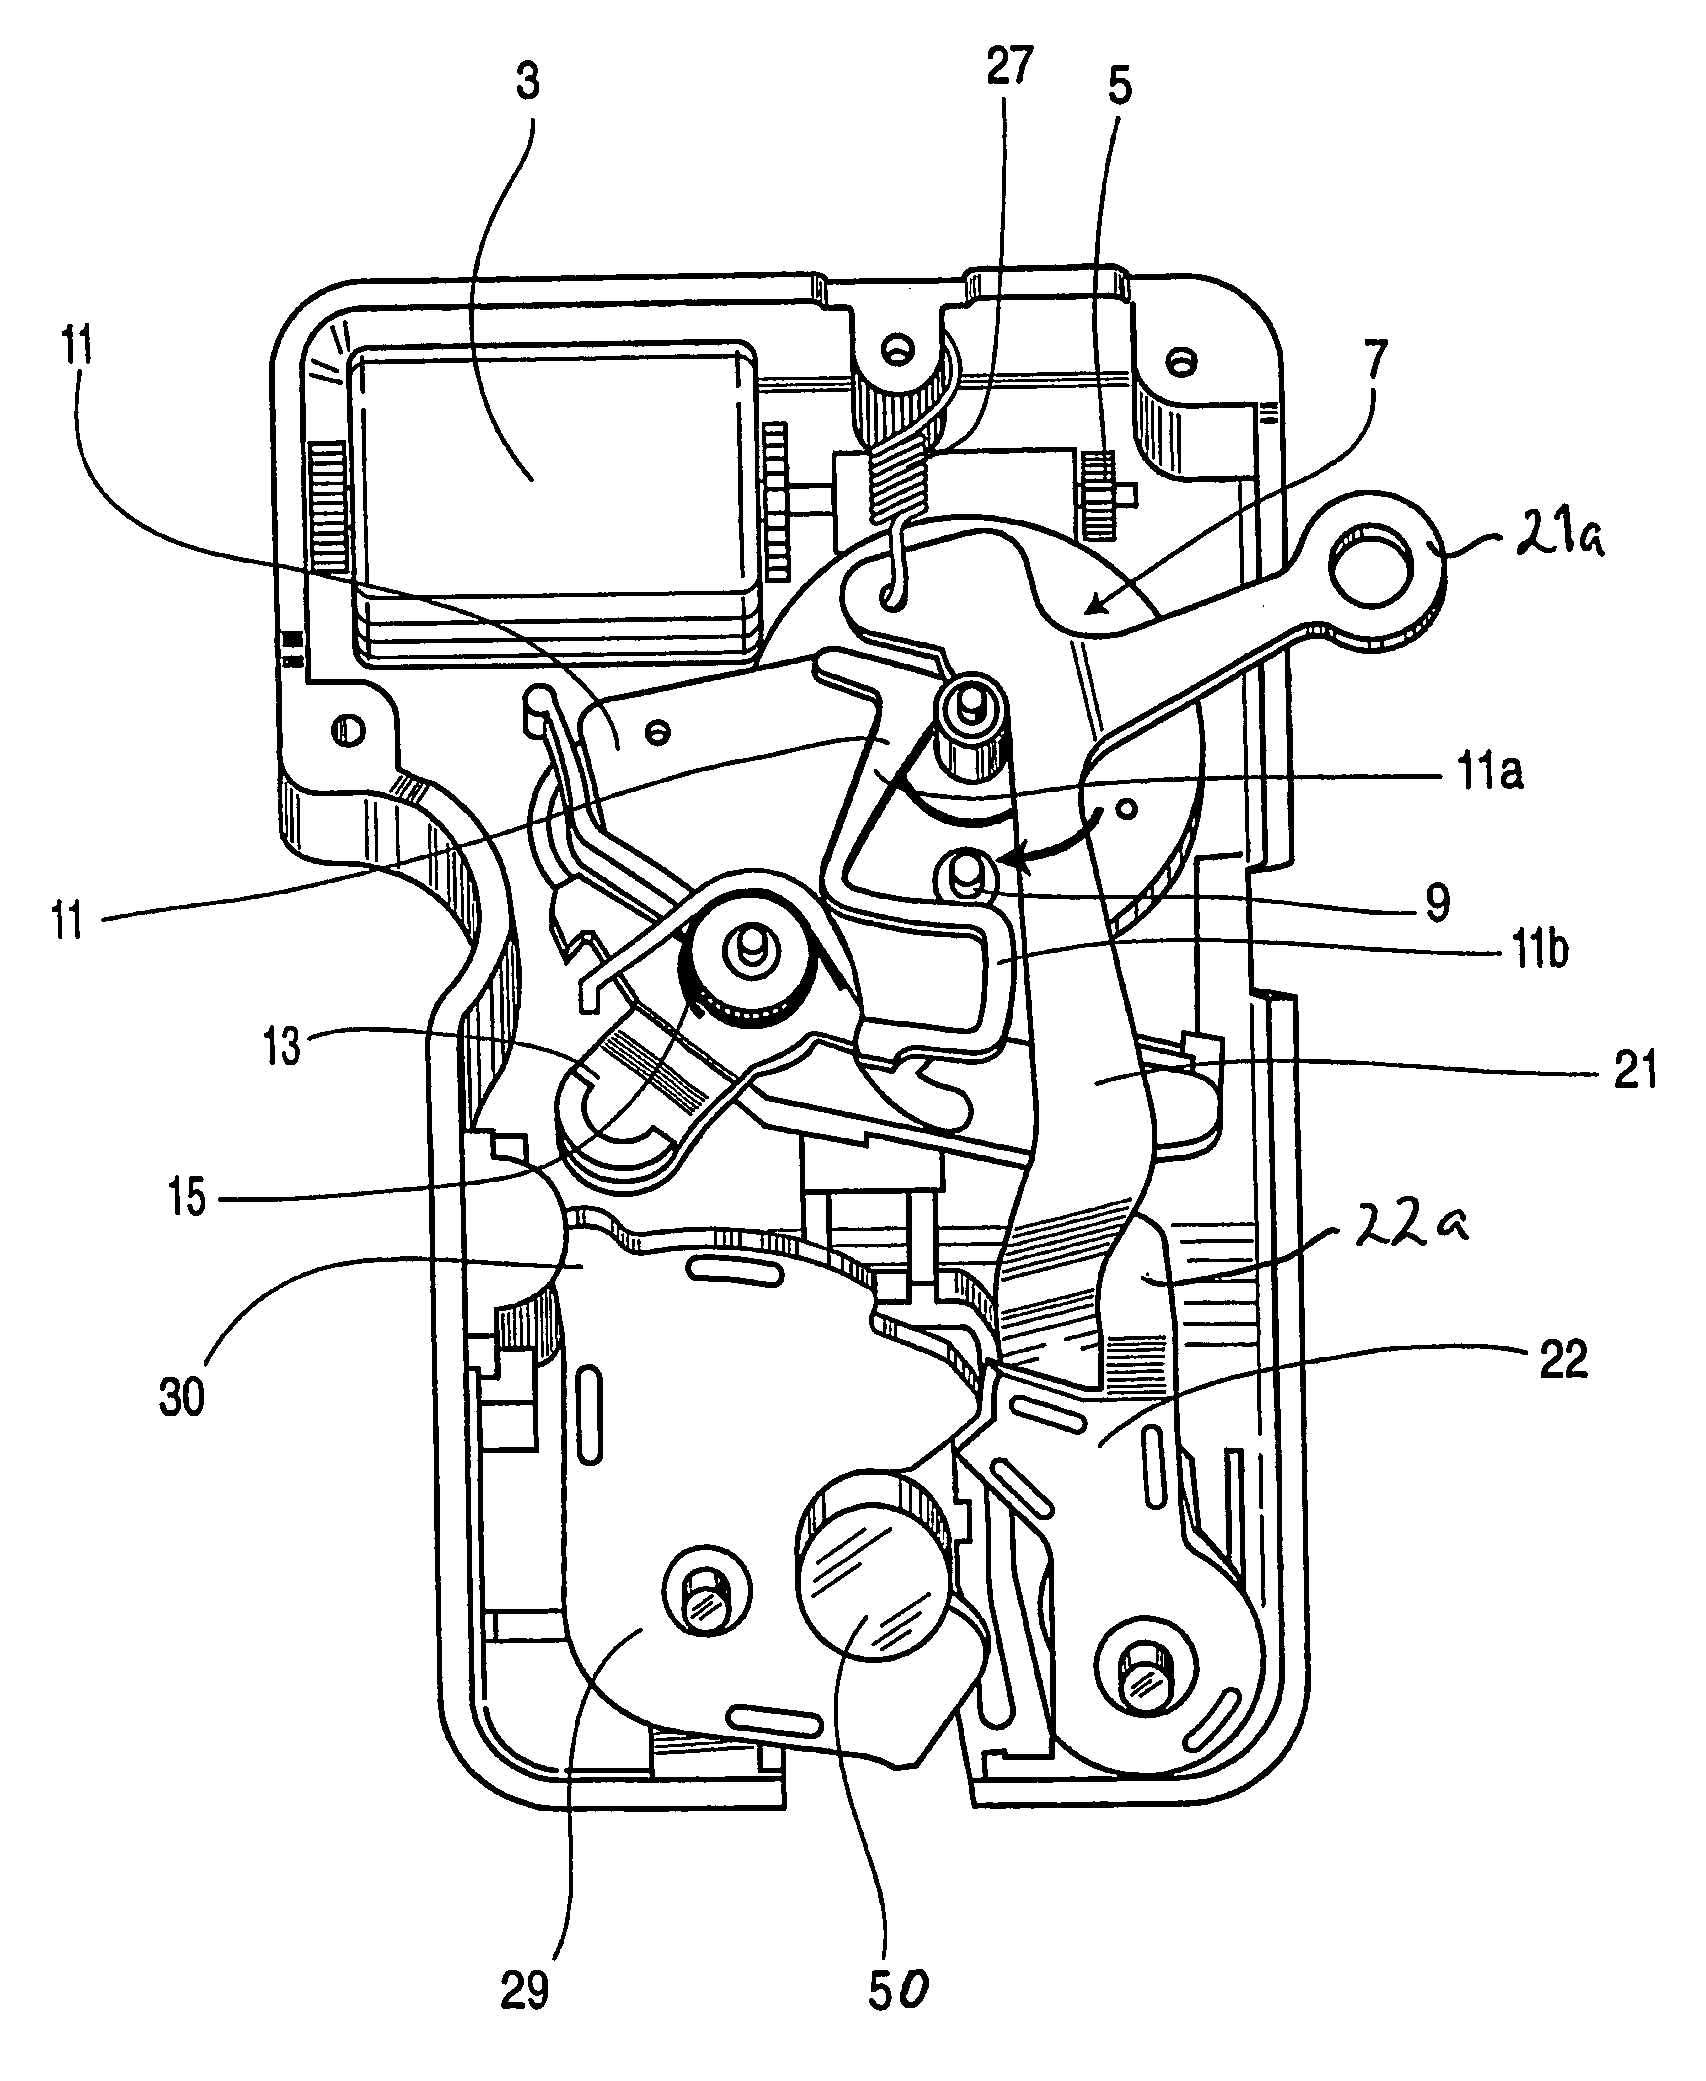 Latch with uni-directional power release mechanism